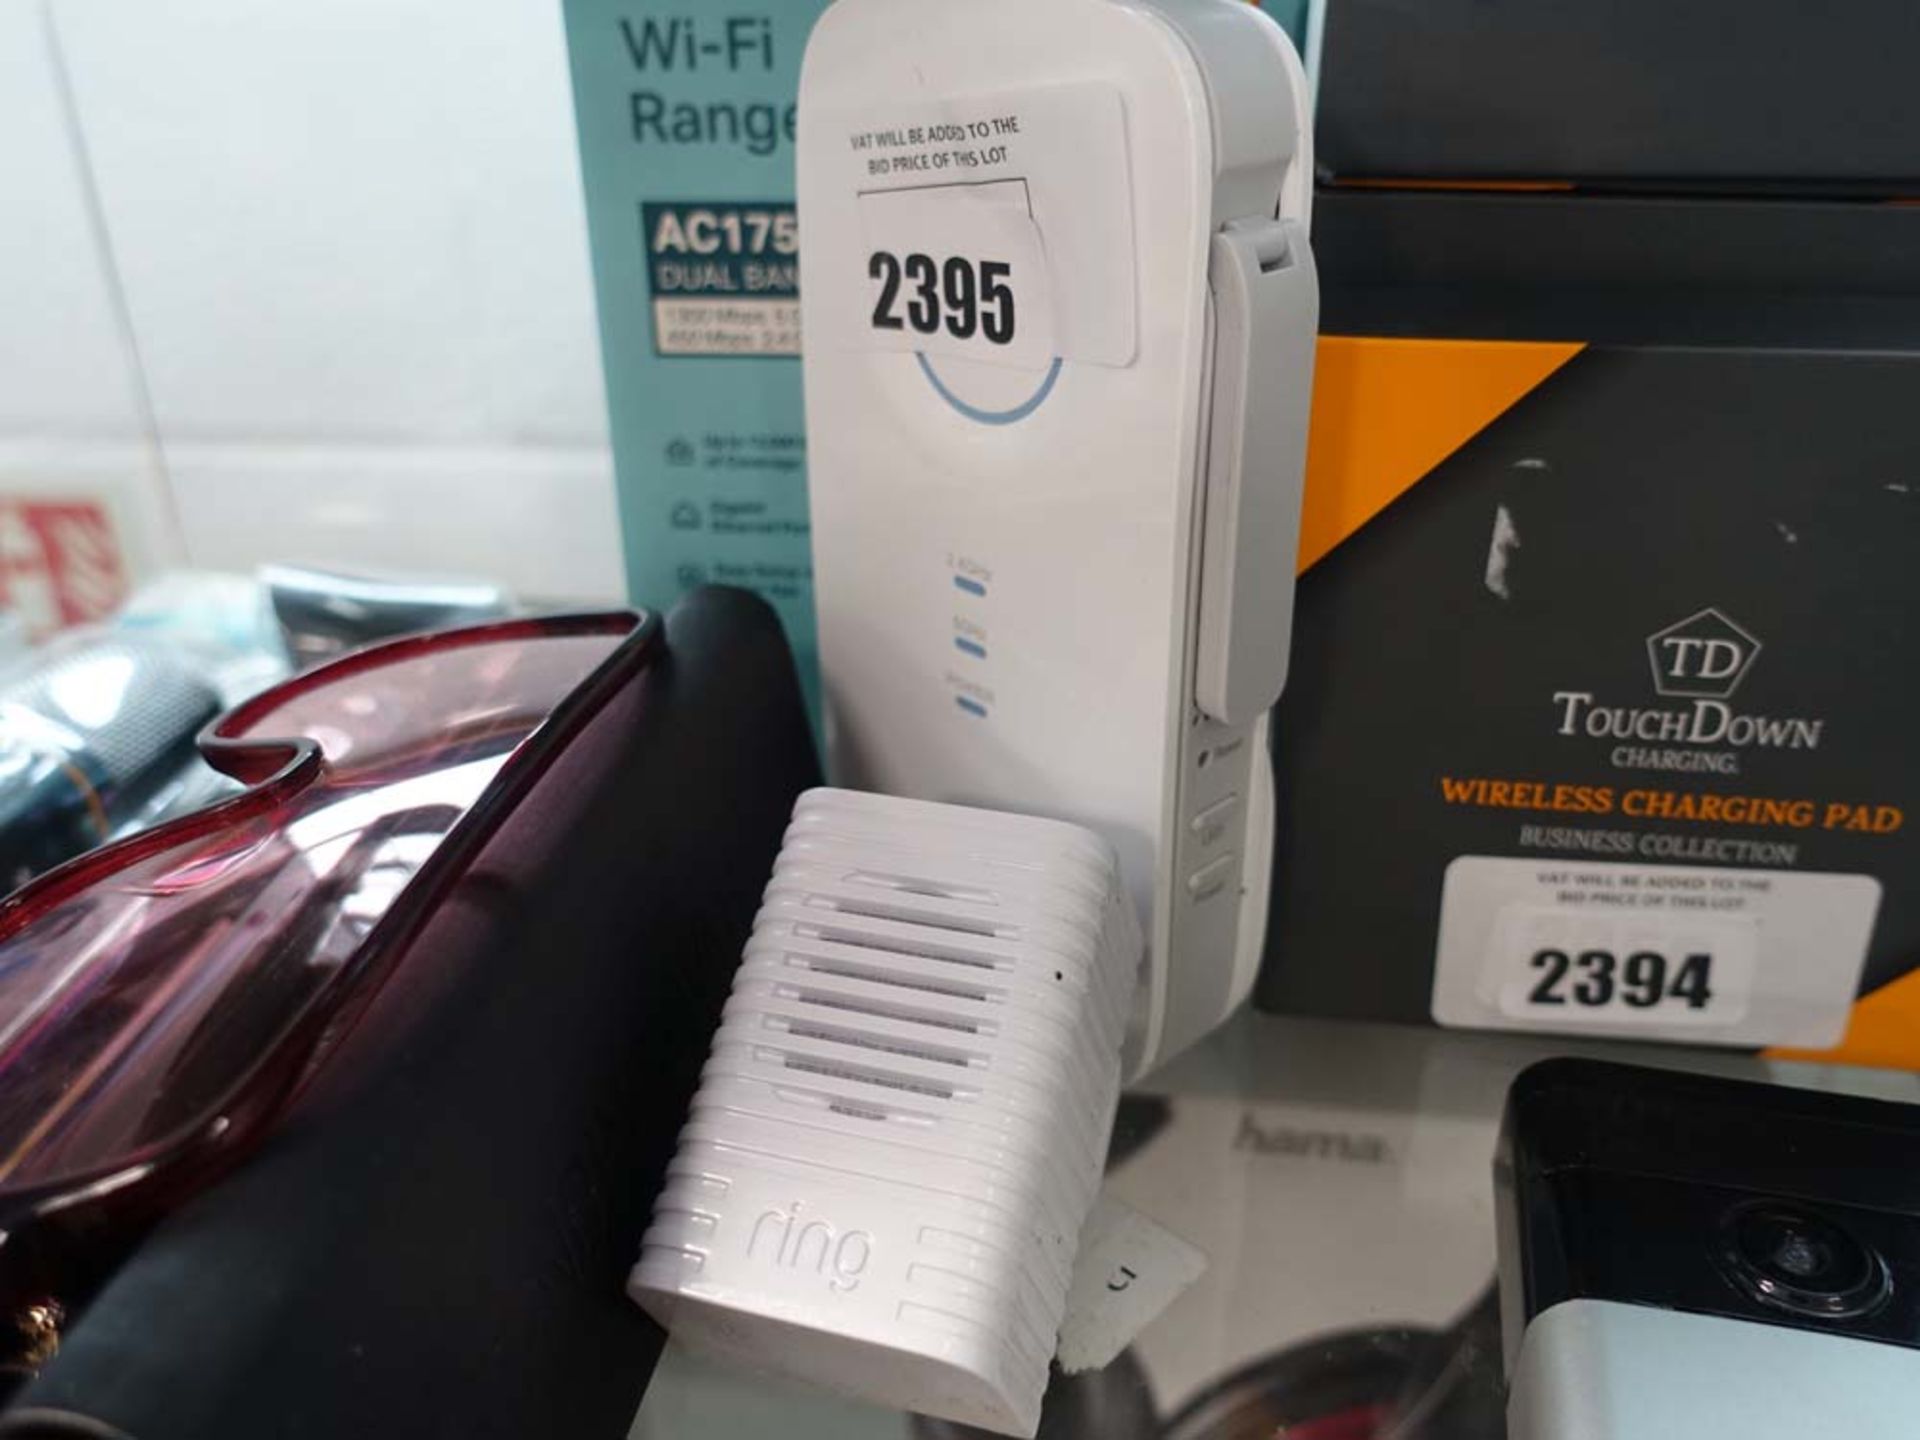 TP Link AC 1750 wifi range extender (one boxed and one unboxed)